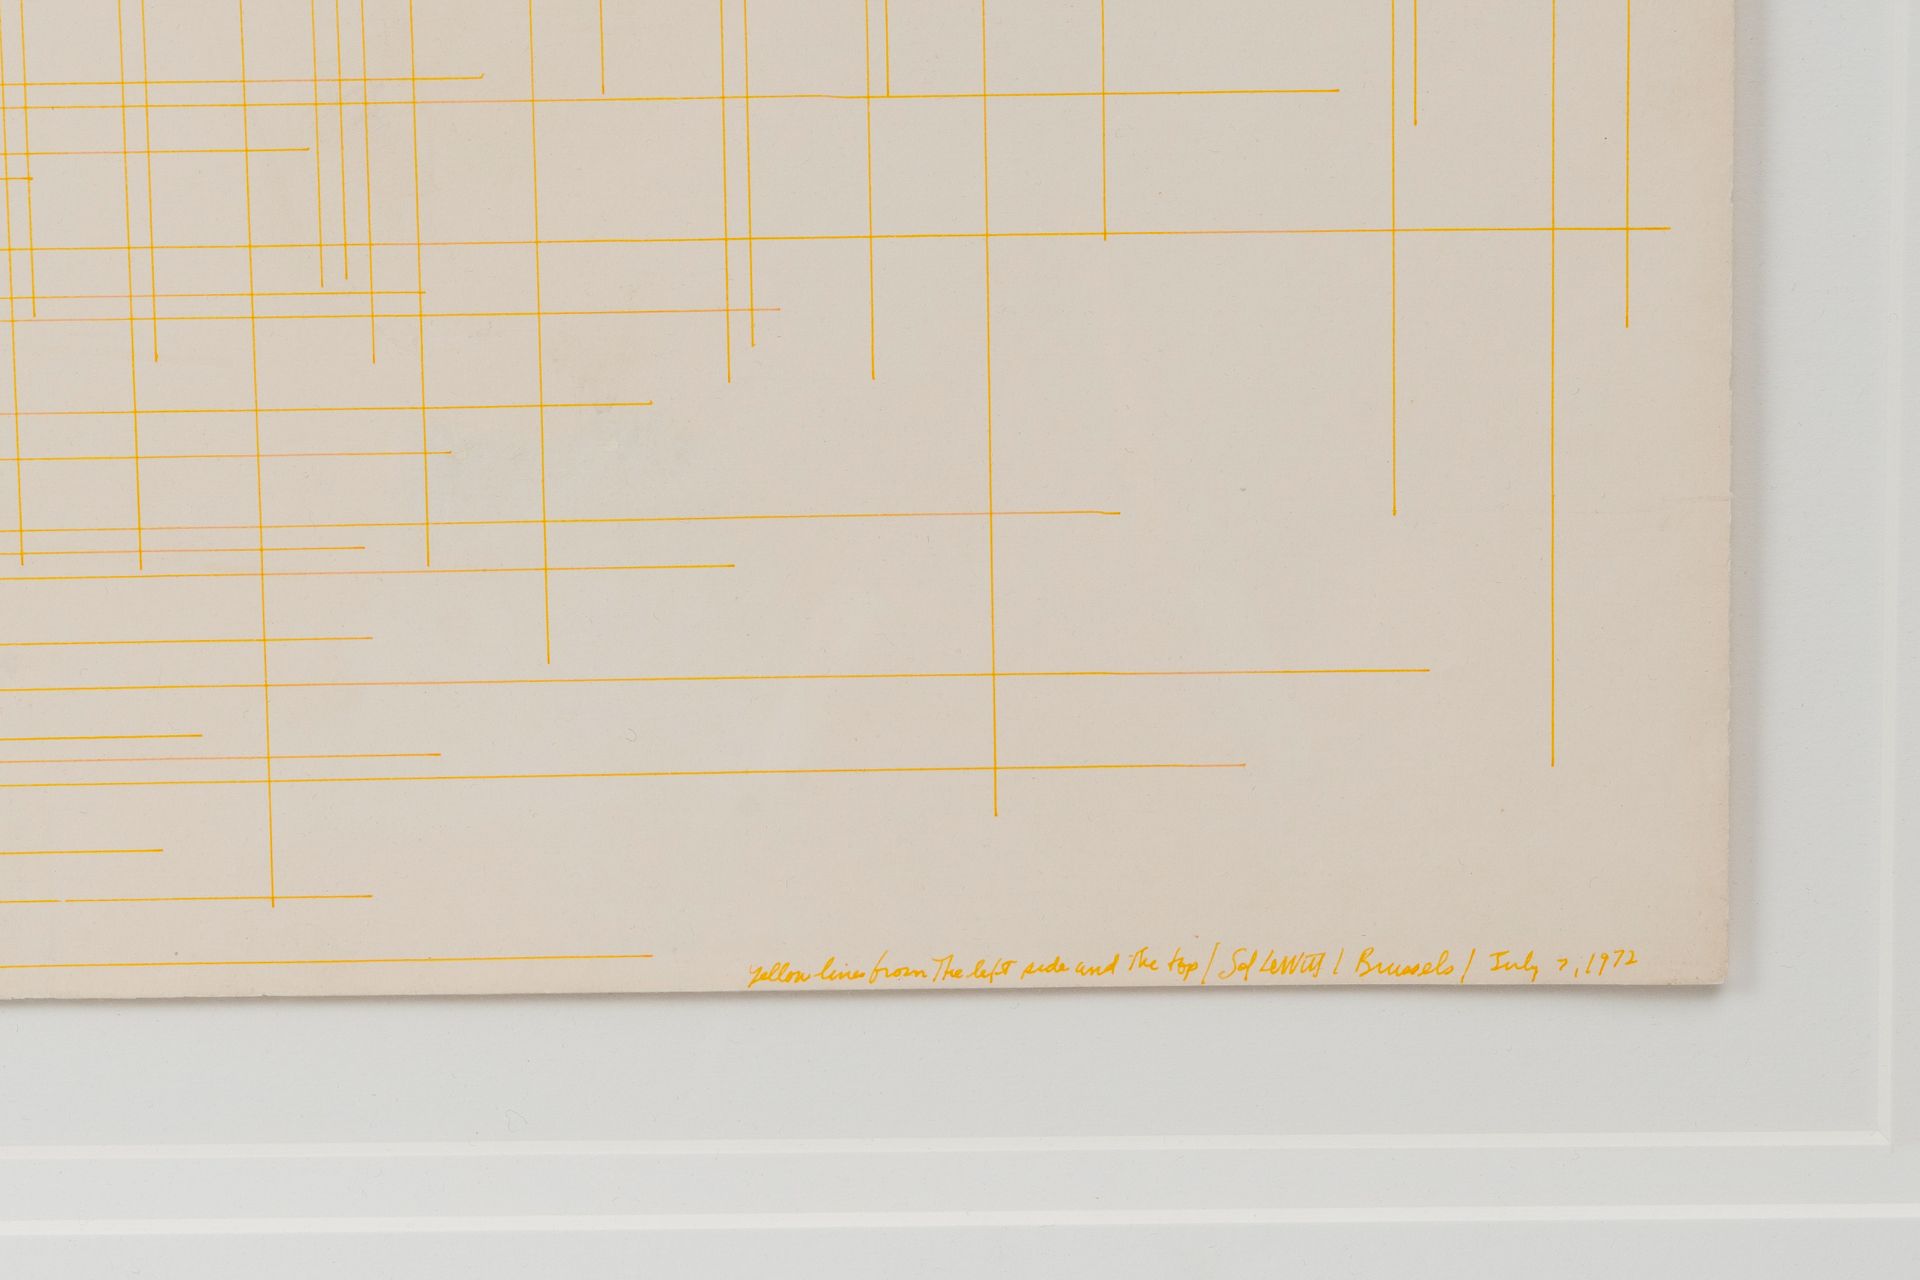 Sol Lewitt (1928-2007): 'Yellow lines from the left side and the top', ballpointpen on paper, dated - Image 4 of 4